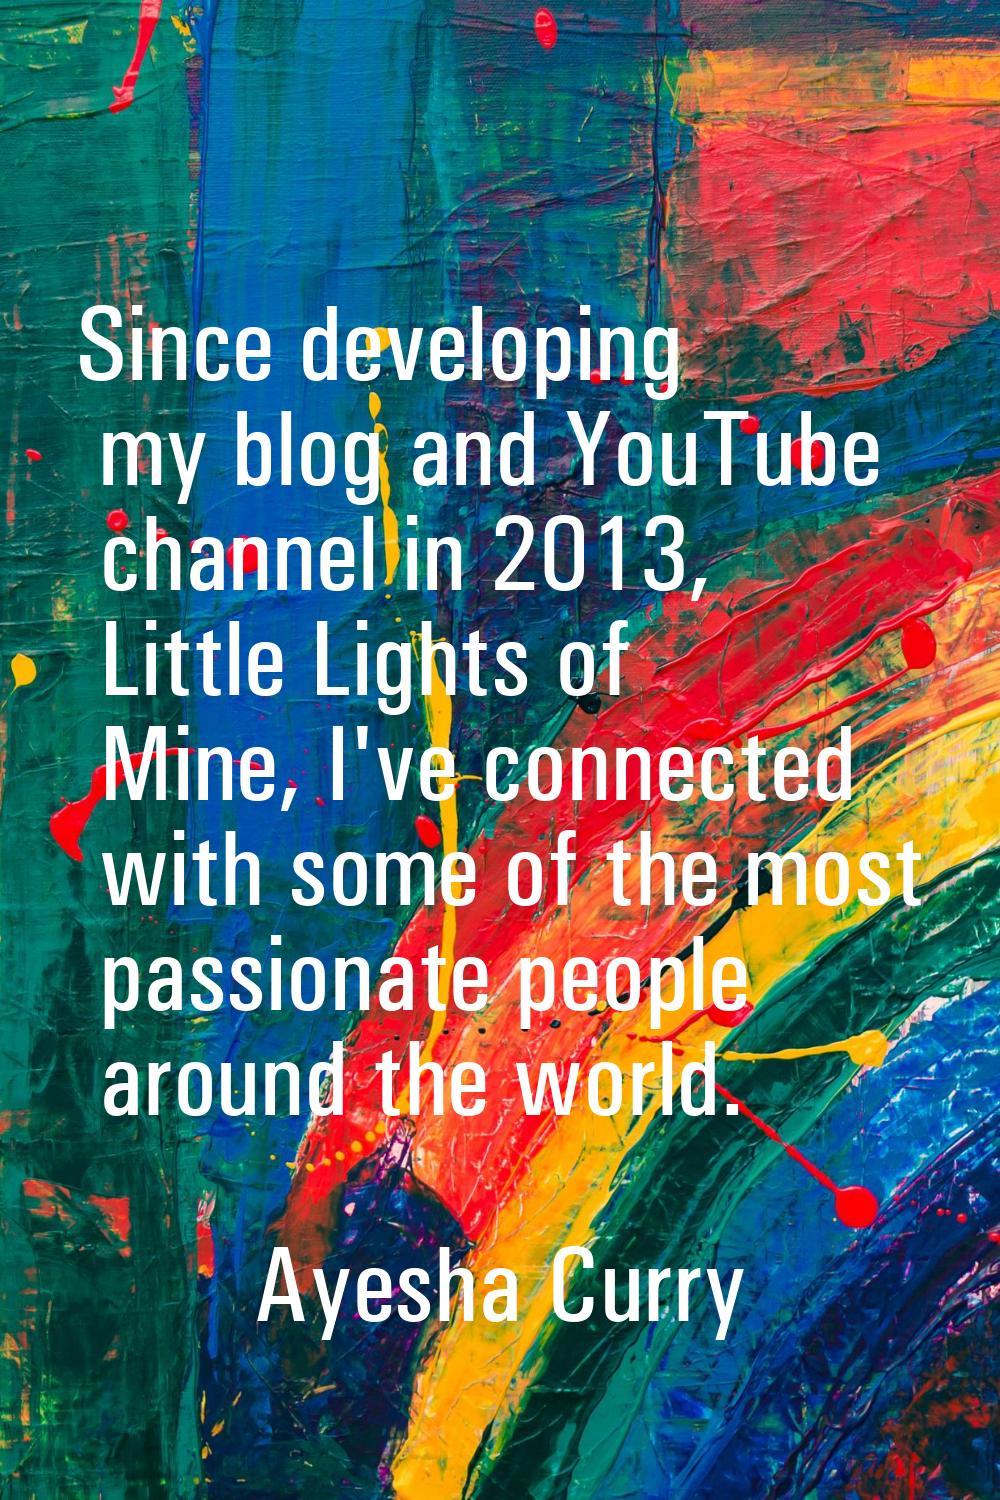 Since developing my blog and YouTube channel in 2013, Little Lights of Mine, I've connected with so